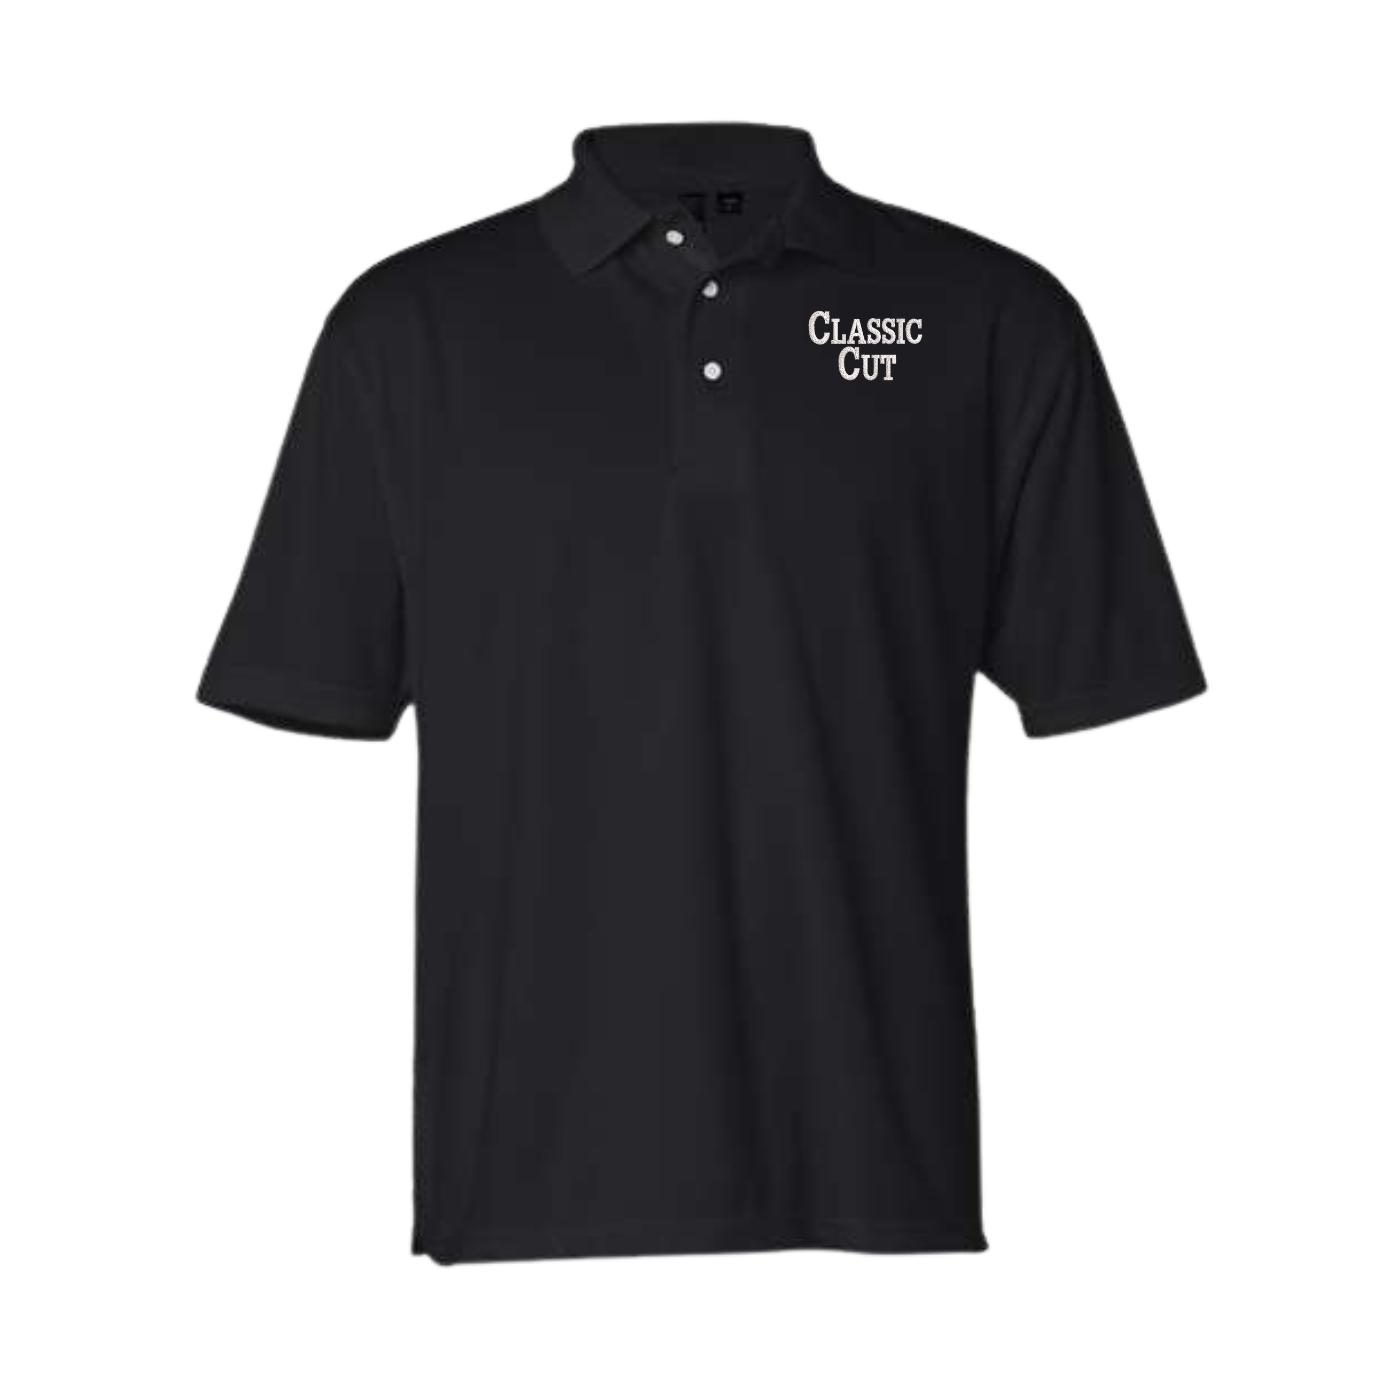 Classic Cut Men's Embroidered Polo Shirt